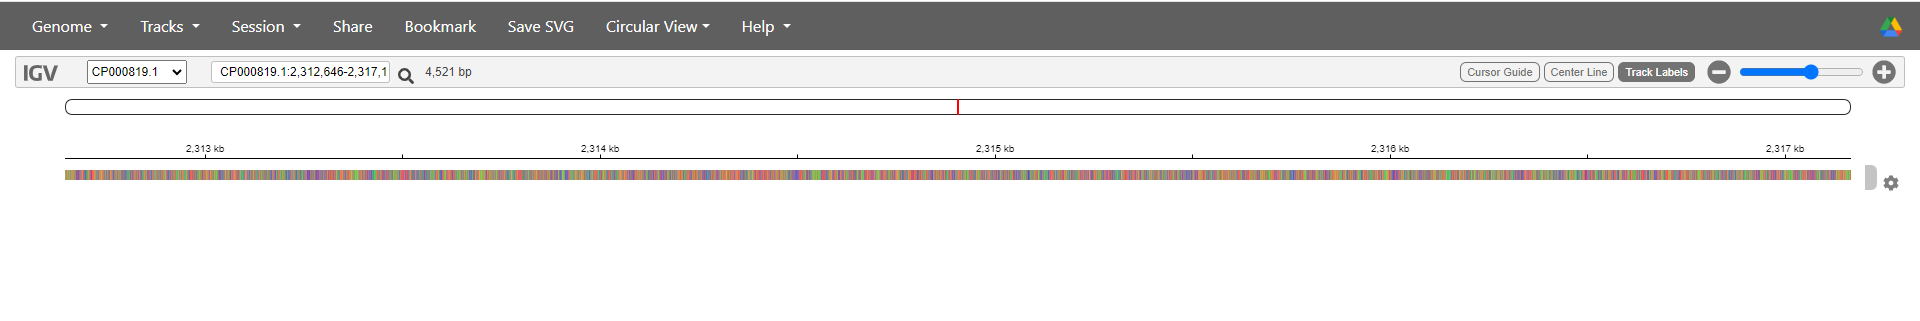 IGV web app with reference genome loaded